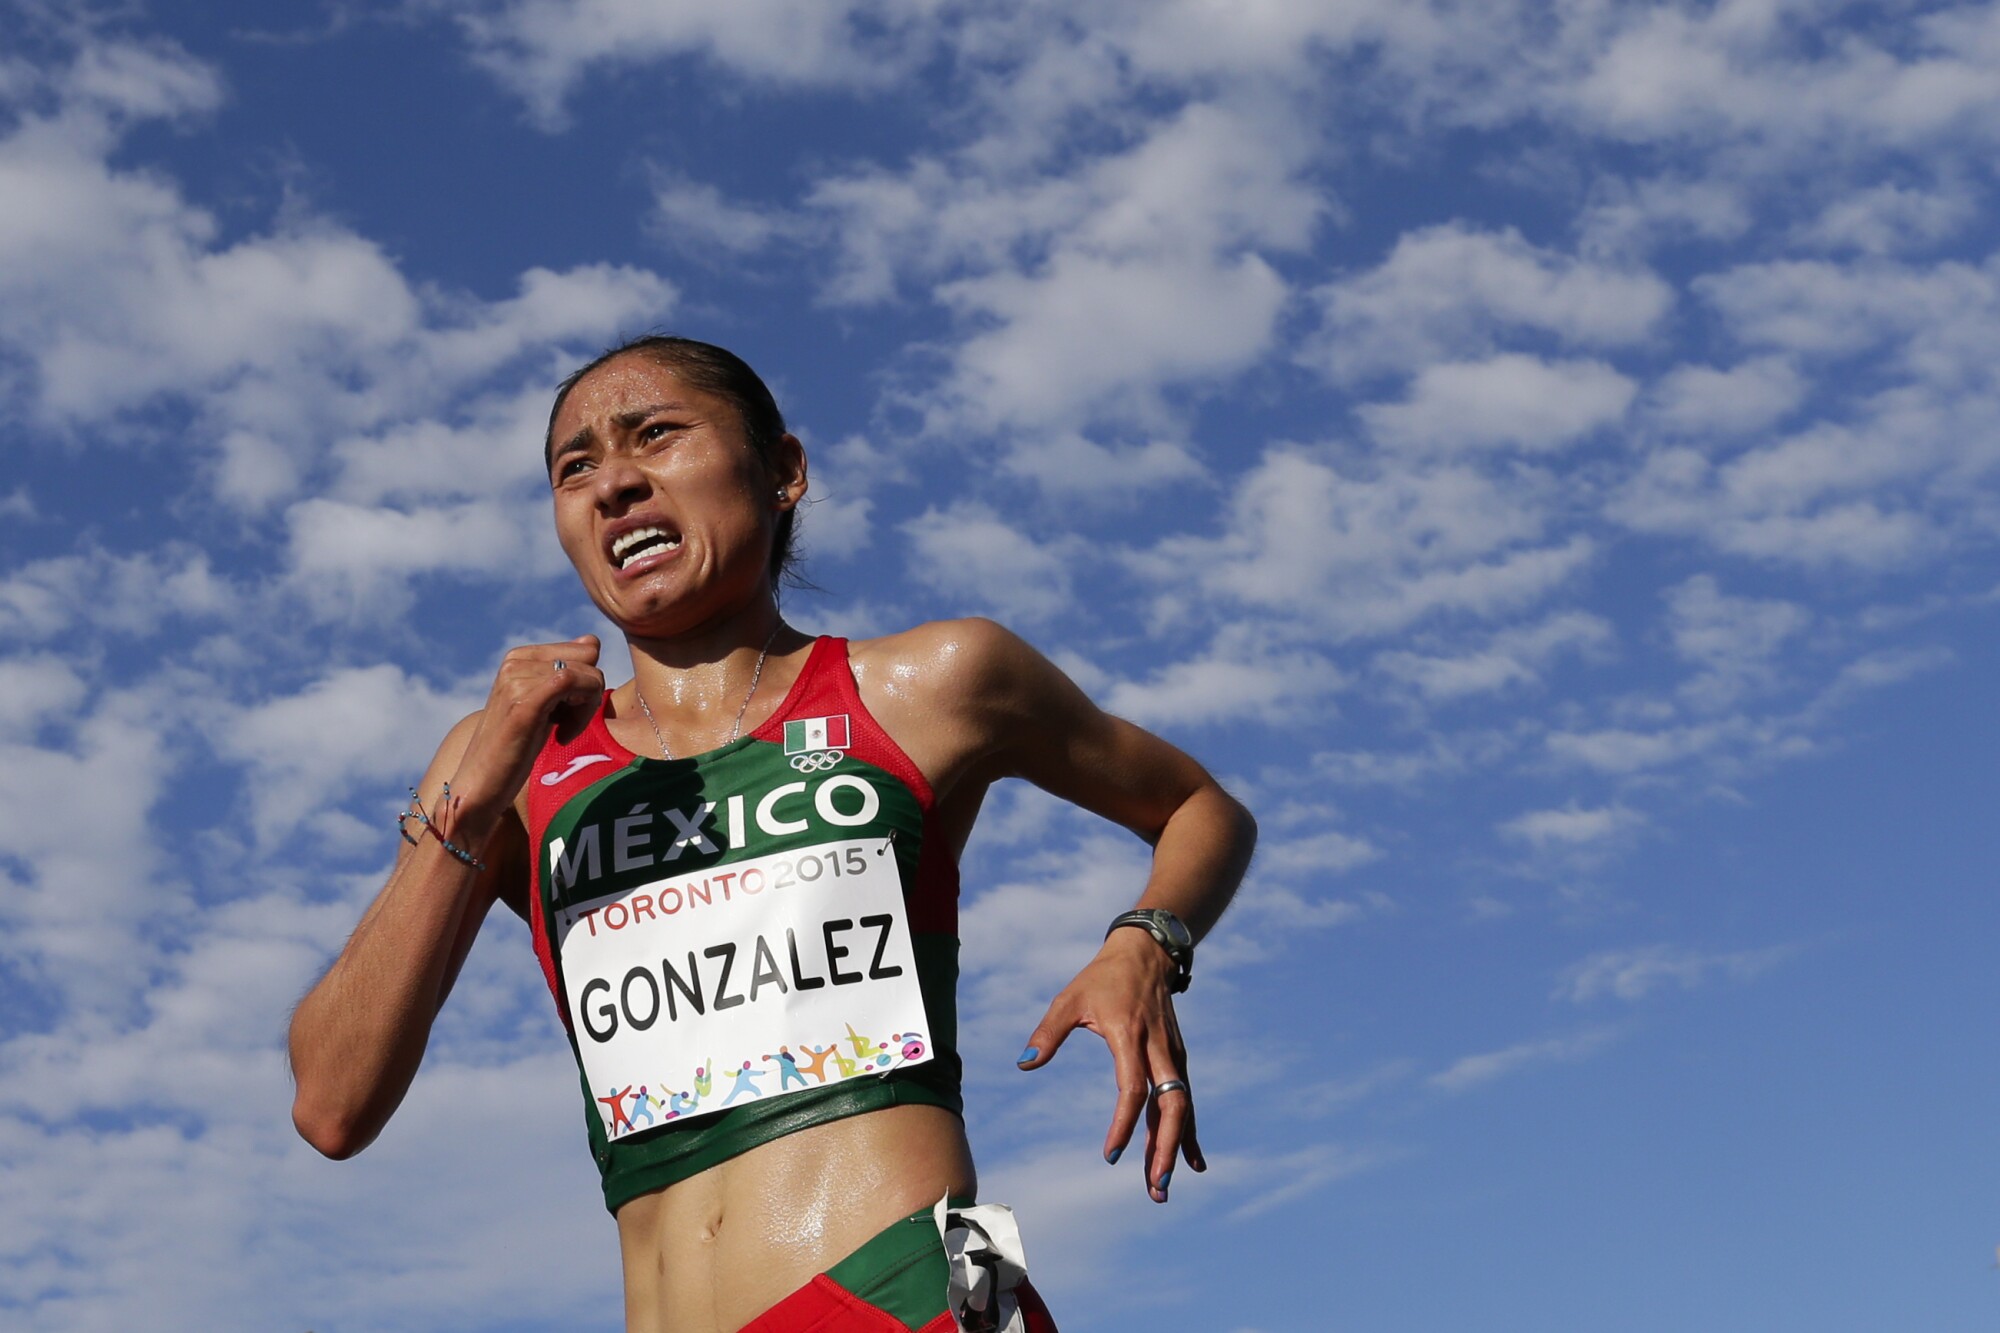 Mexico's Maria Gonzalez competes during a 20-kilometer racewalk at the 2015 Pan Am Games in Toronto.